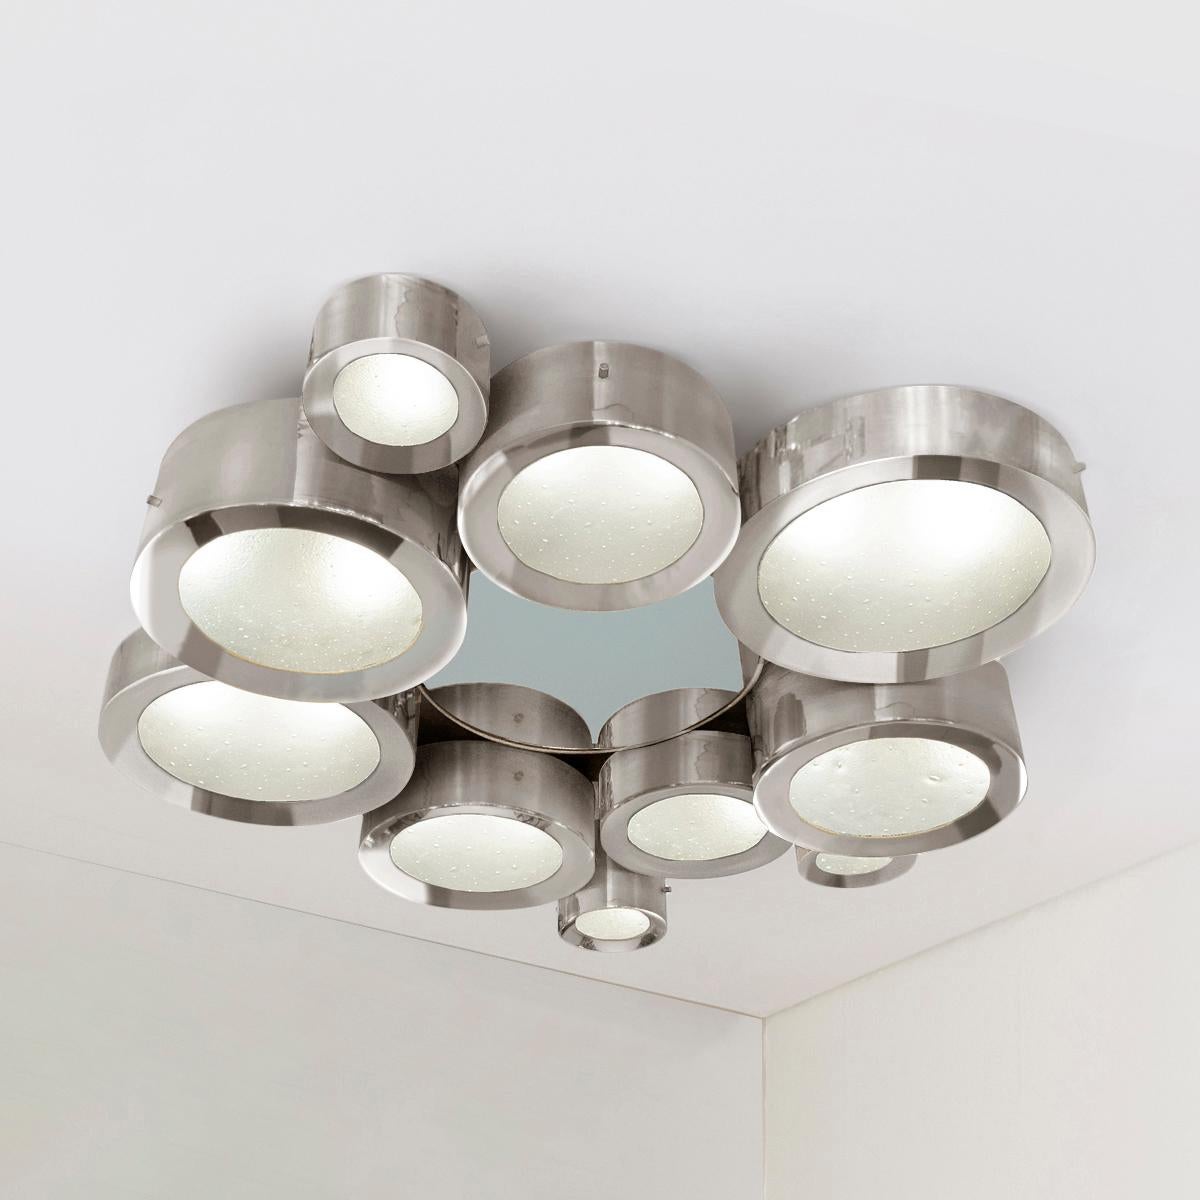 Contemporary Helios 44 Ceiling Light by Gaspare Asaro-Satin Brass and Satin Nickel For Sale